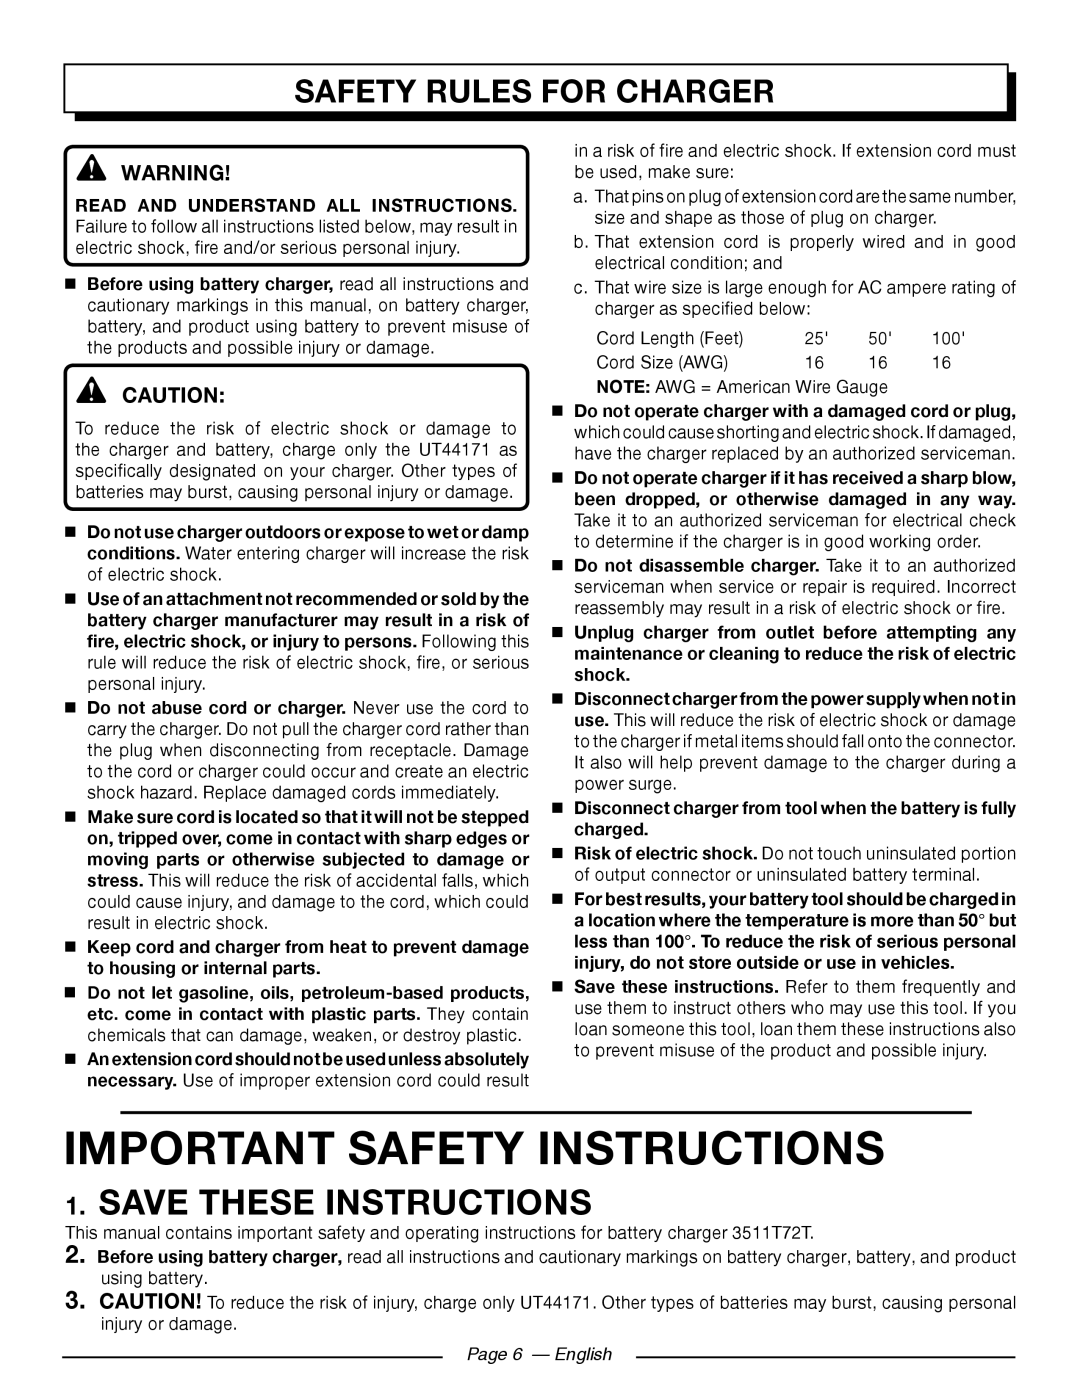 Homelite UT44171 Save These Instructions, Safety Rules For Charger, Page 6 - English, Important Safety Instructions 